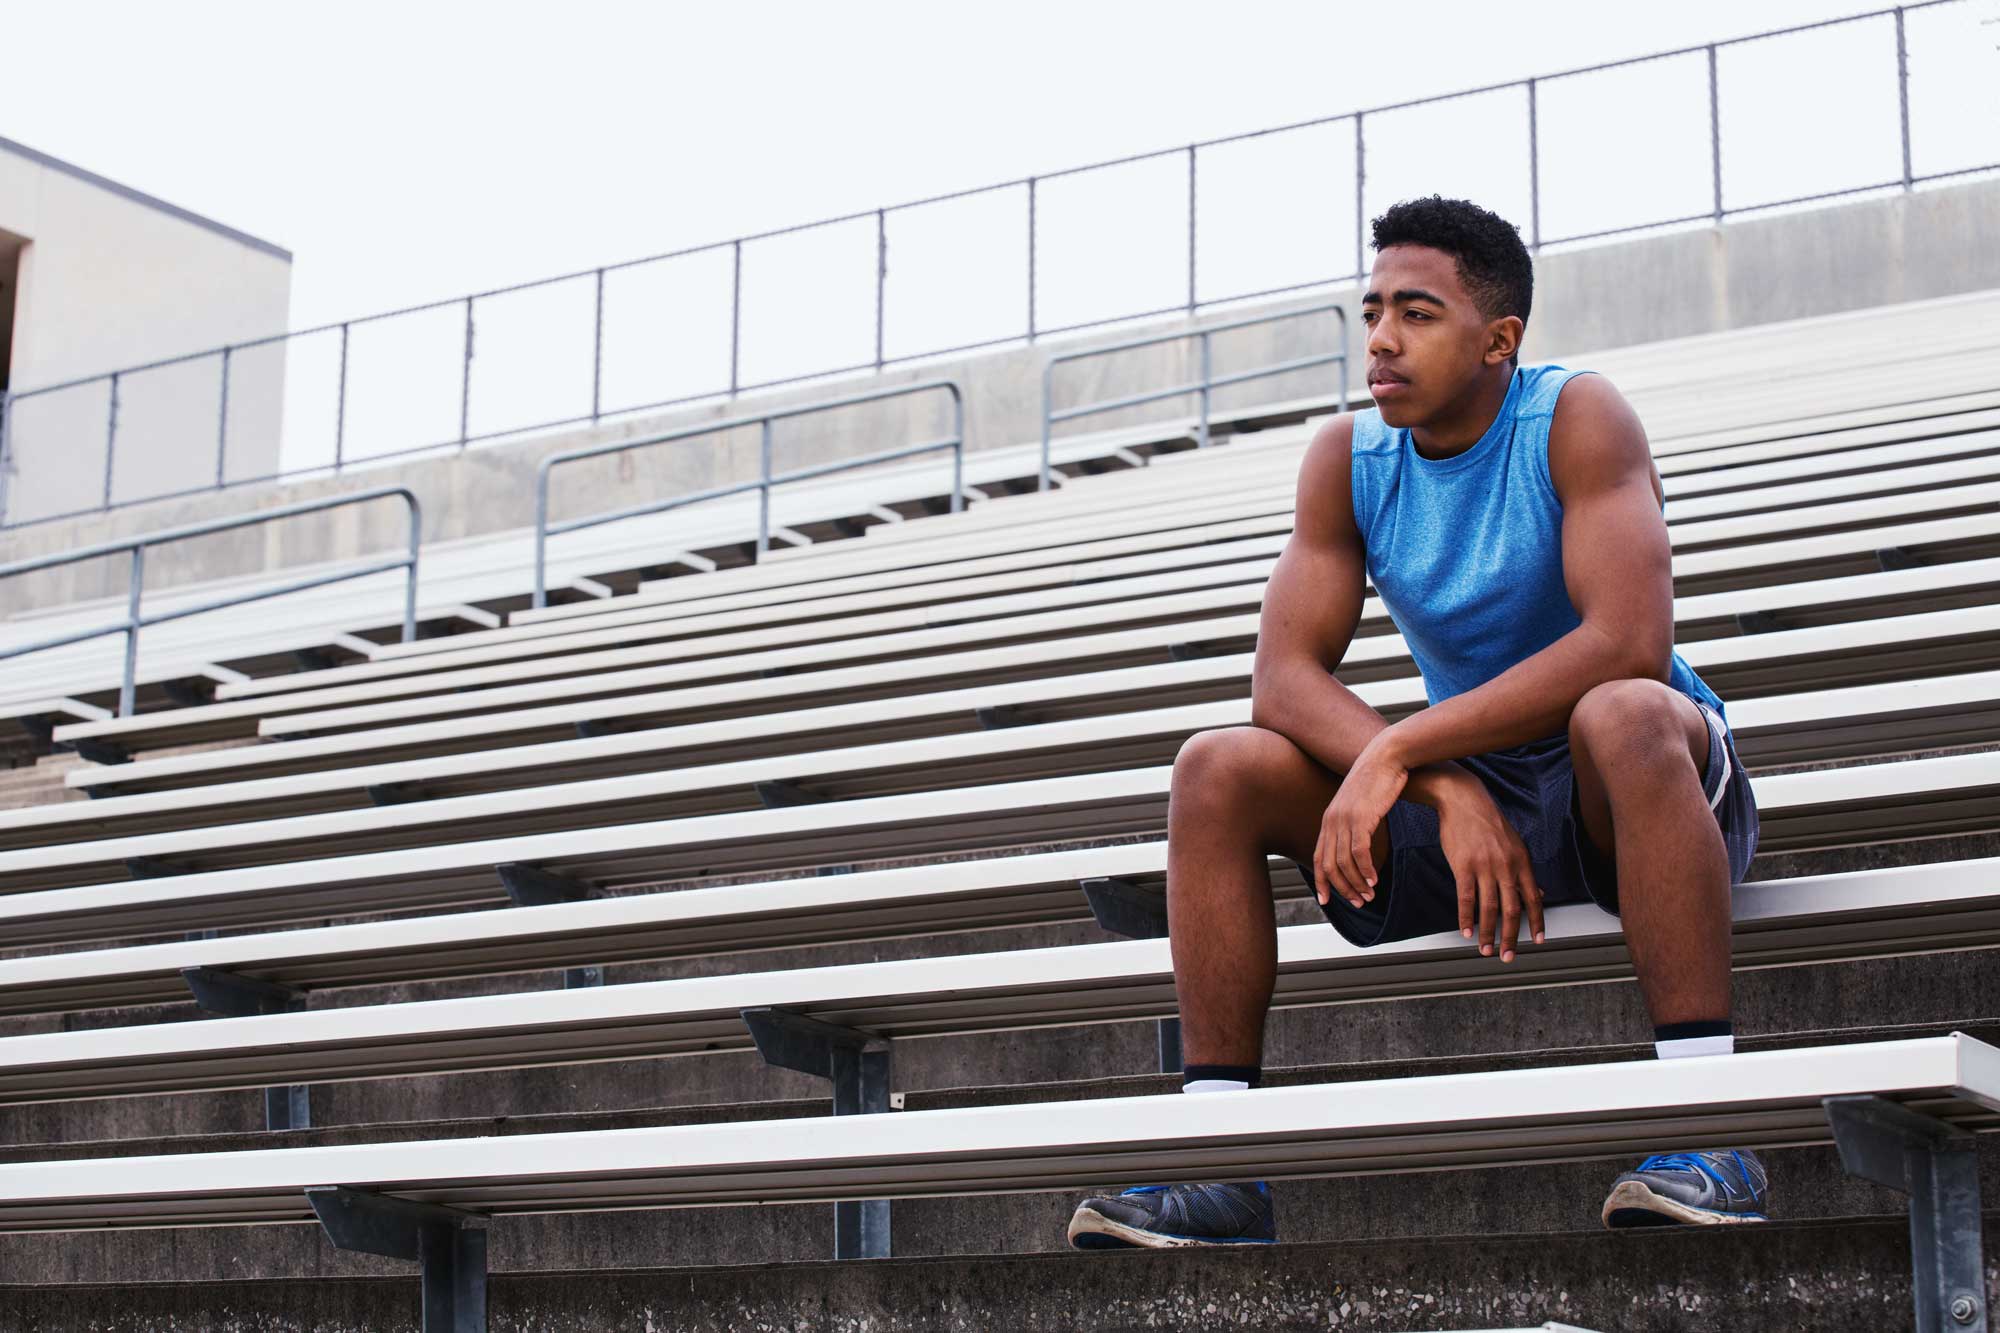 Young track athlete sits on bleachers, lost in thought. Inattention is a common symptom in those suffering from ADHD. Testing can diagnose whether these symptoms are chronic, and can give individuals treatments and skills to manage attention deficits.